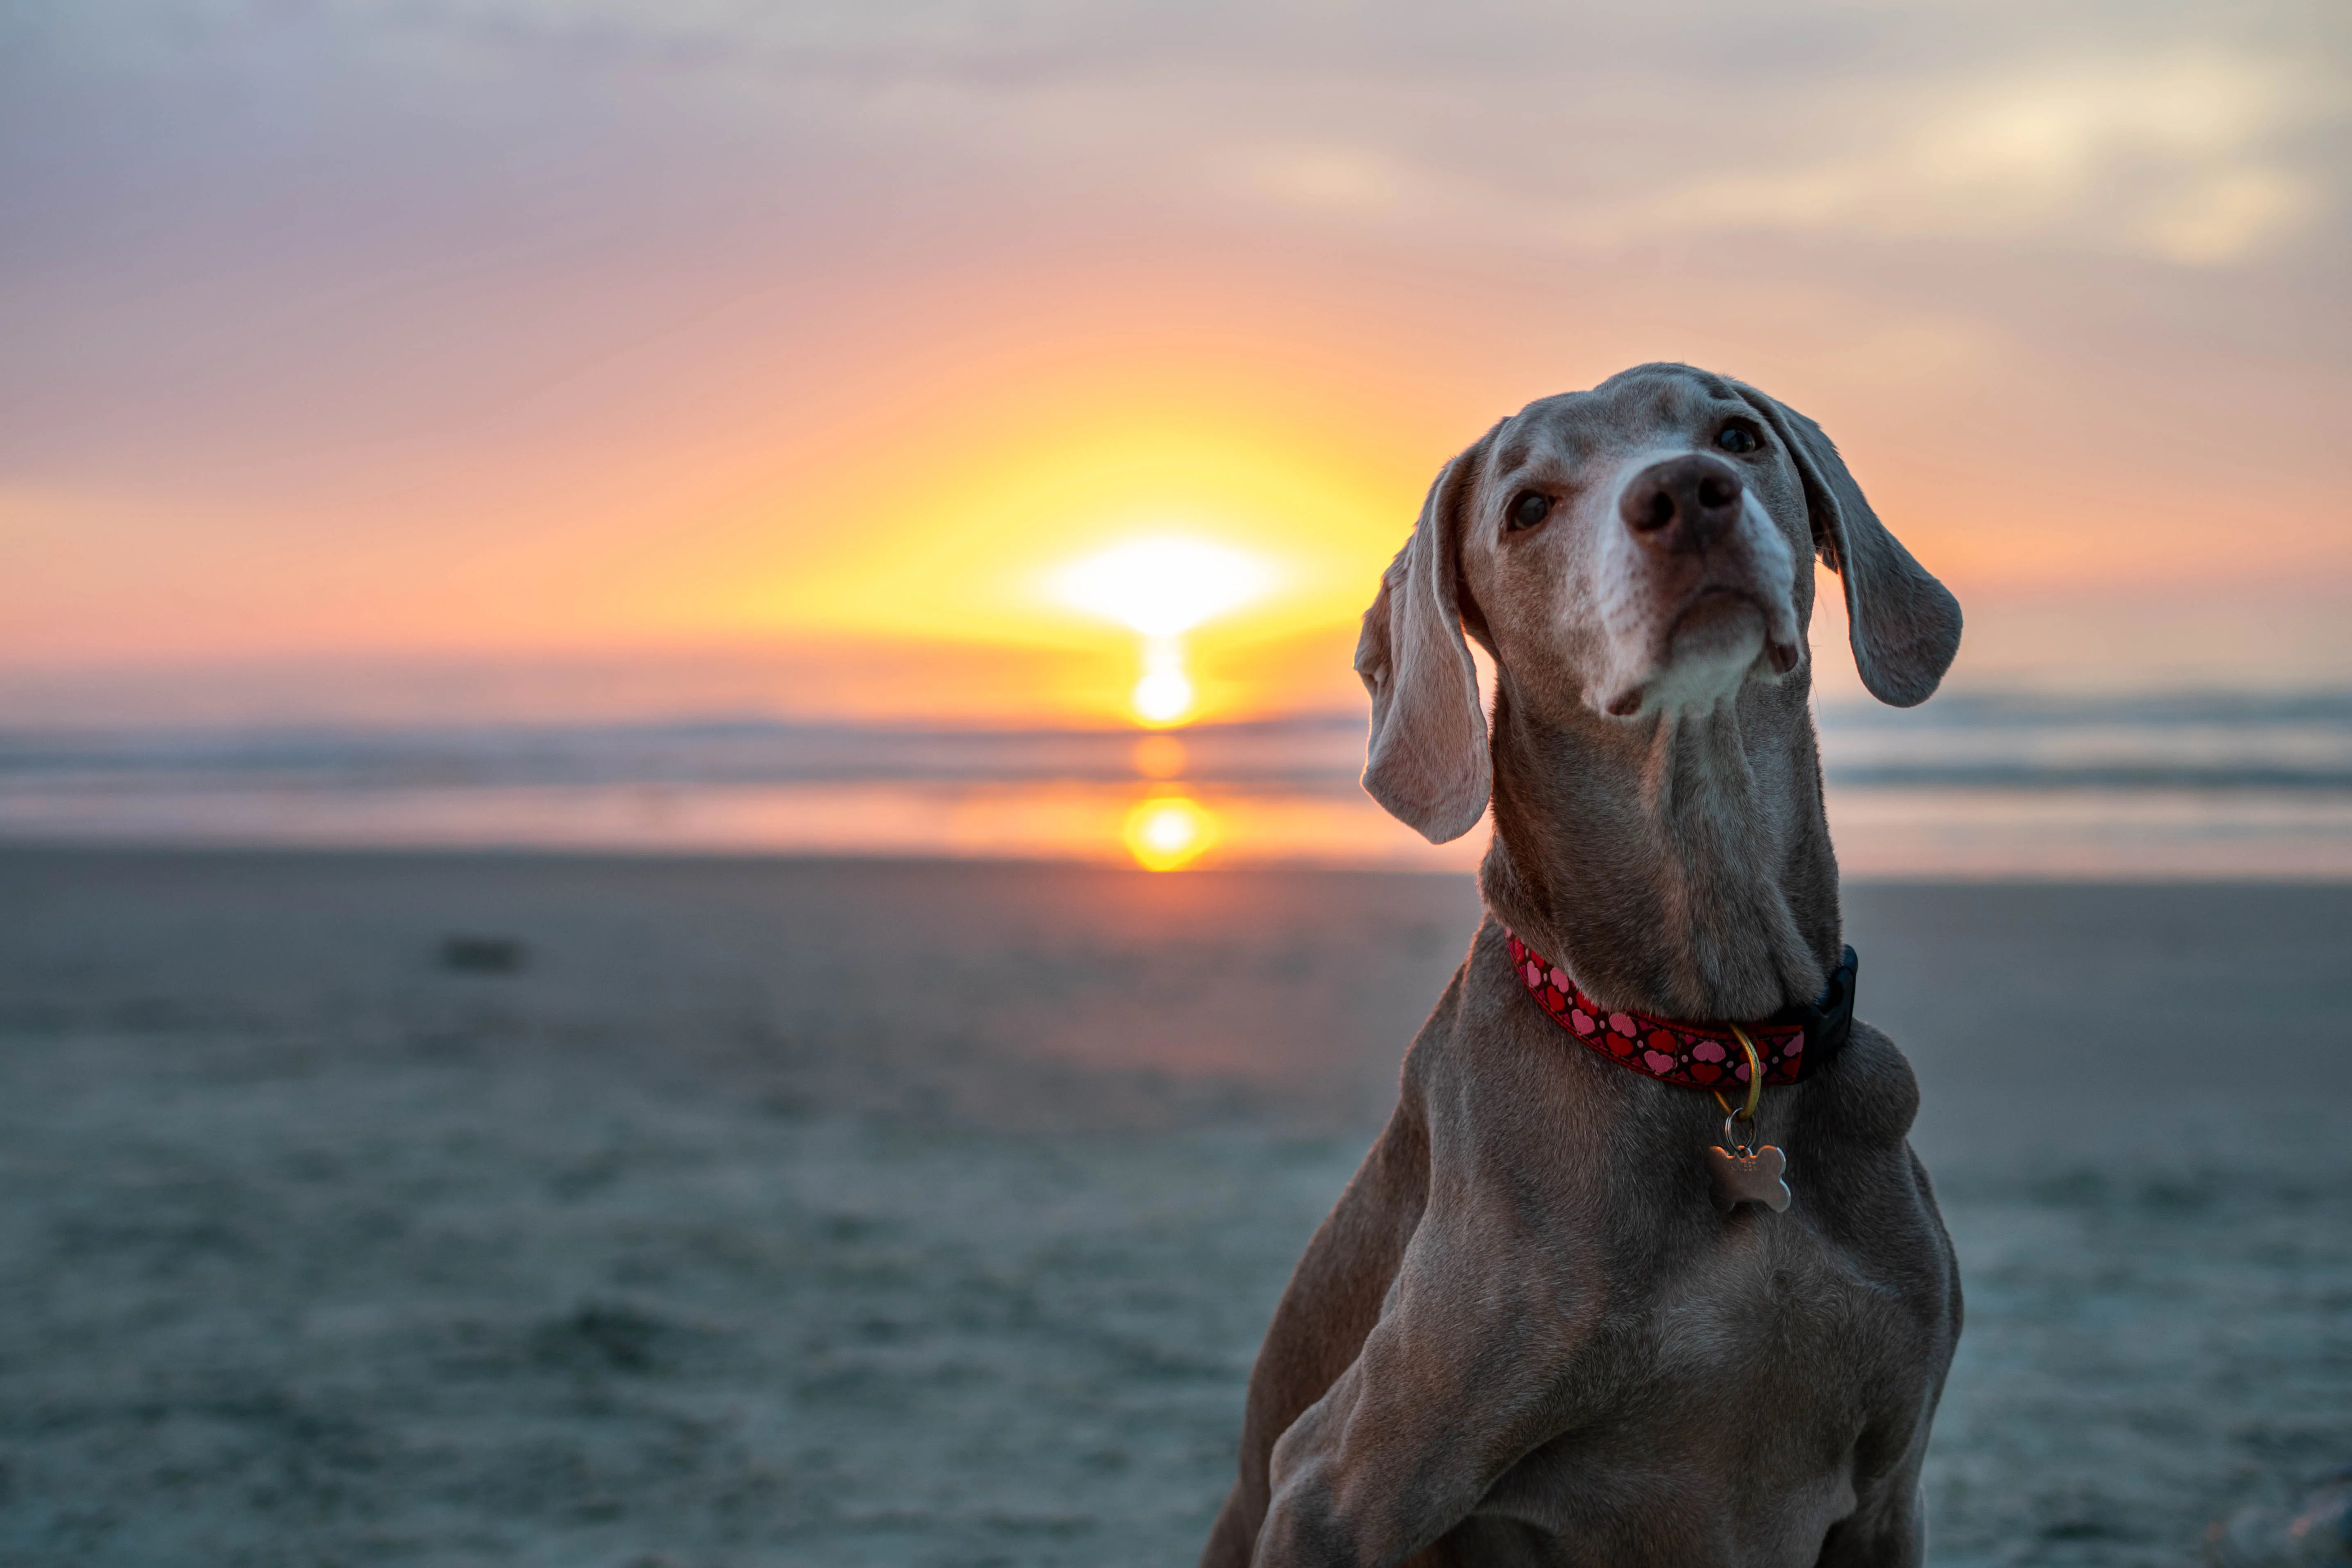 Kimbers sitting looking towards the camera with a golden glow reflecting on her and a beach sunrise in the background.